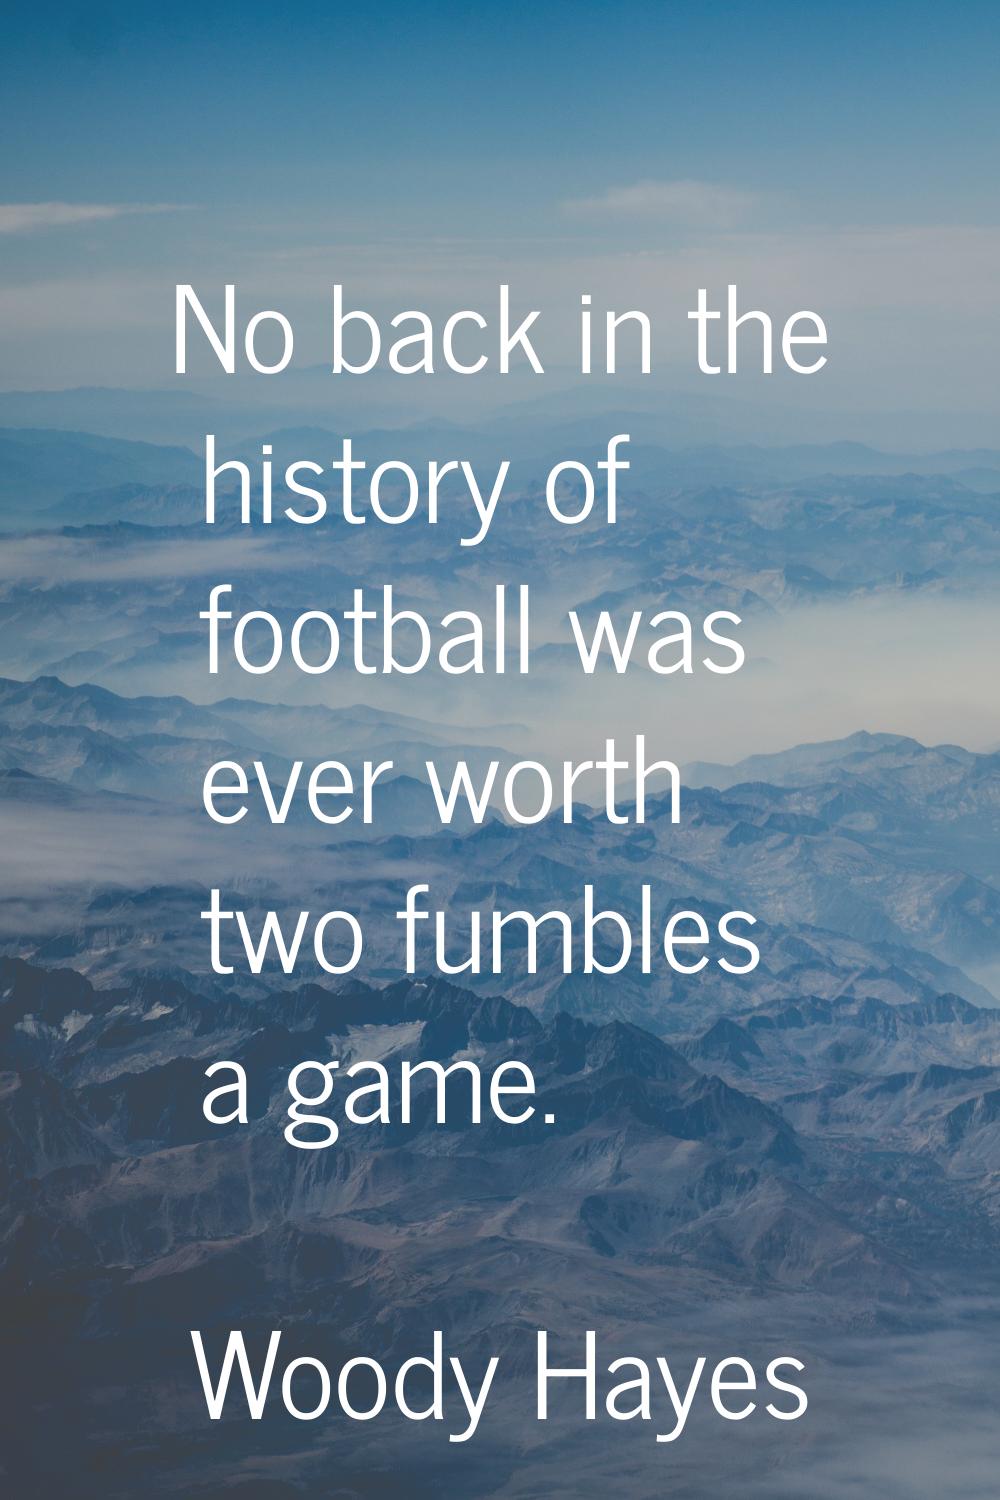 No back in the history of football was ever worth two fumbles a game.